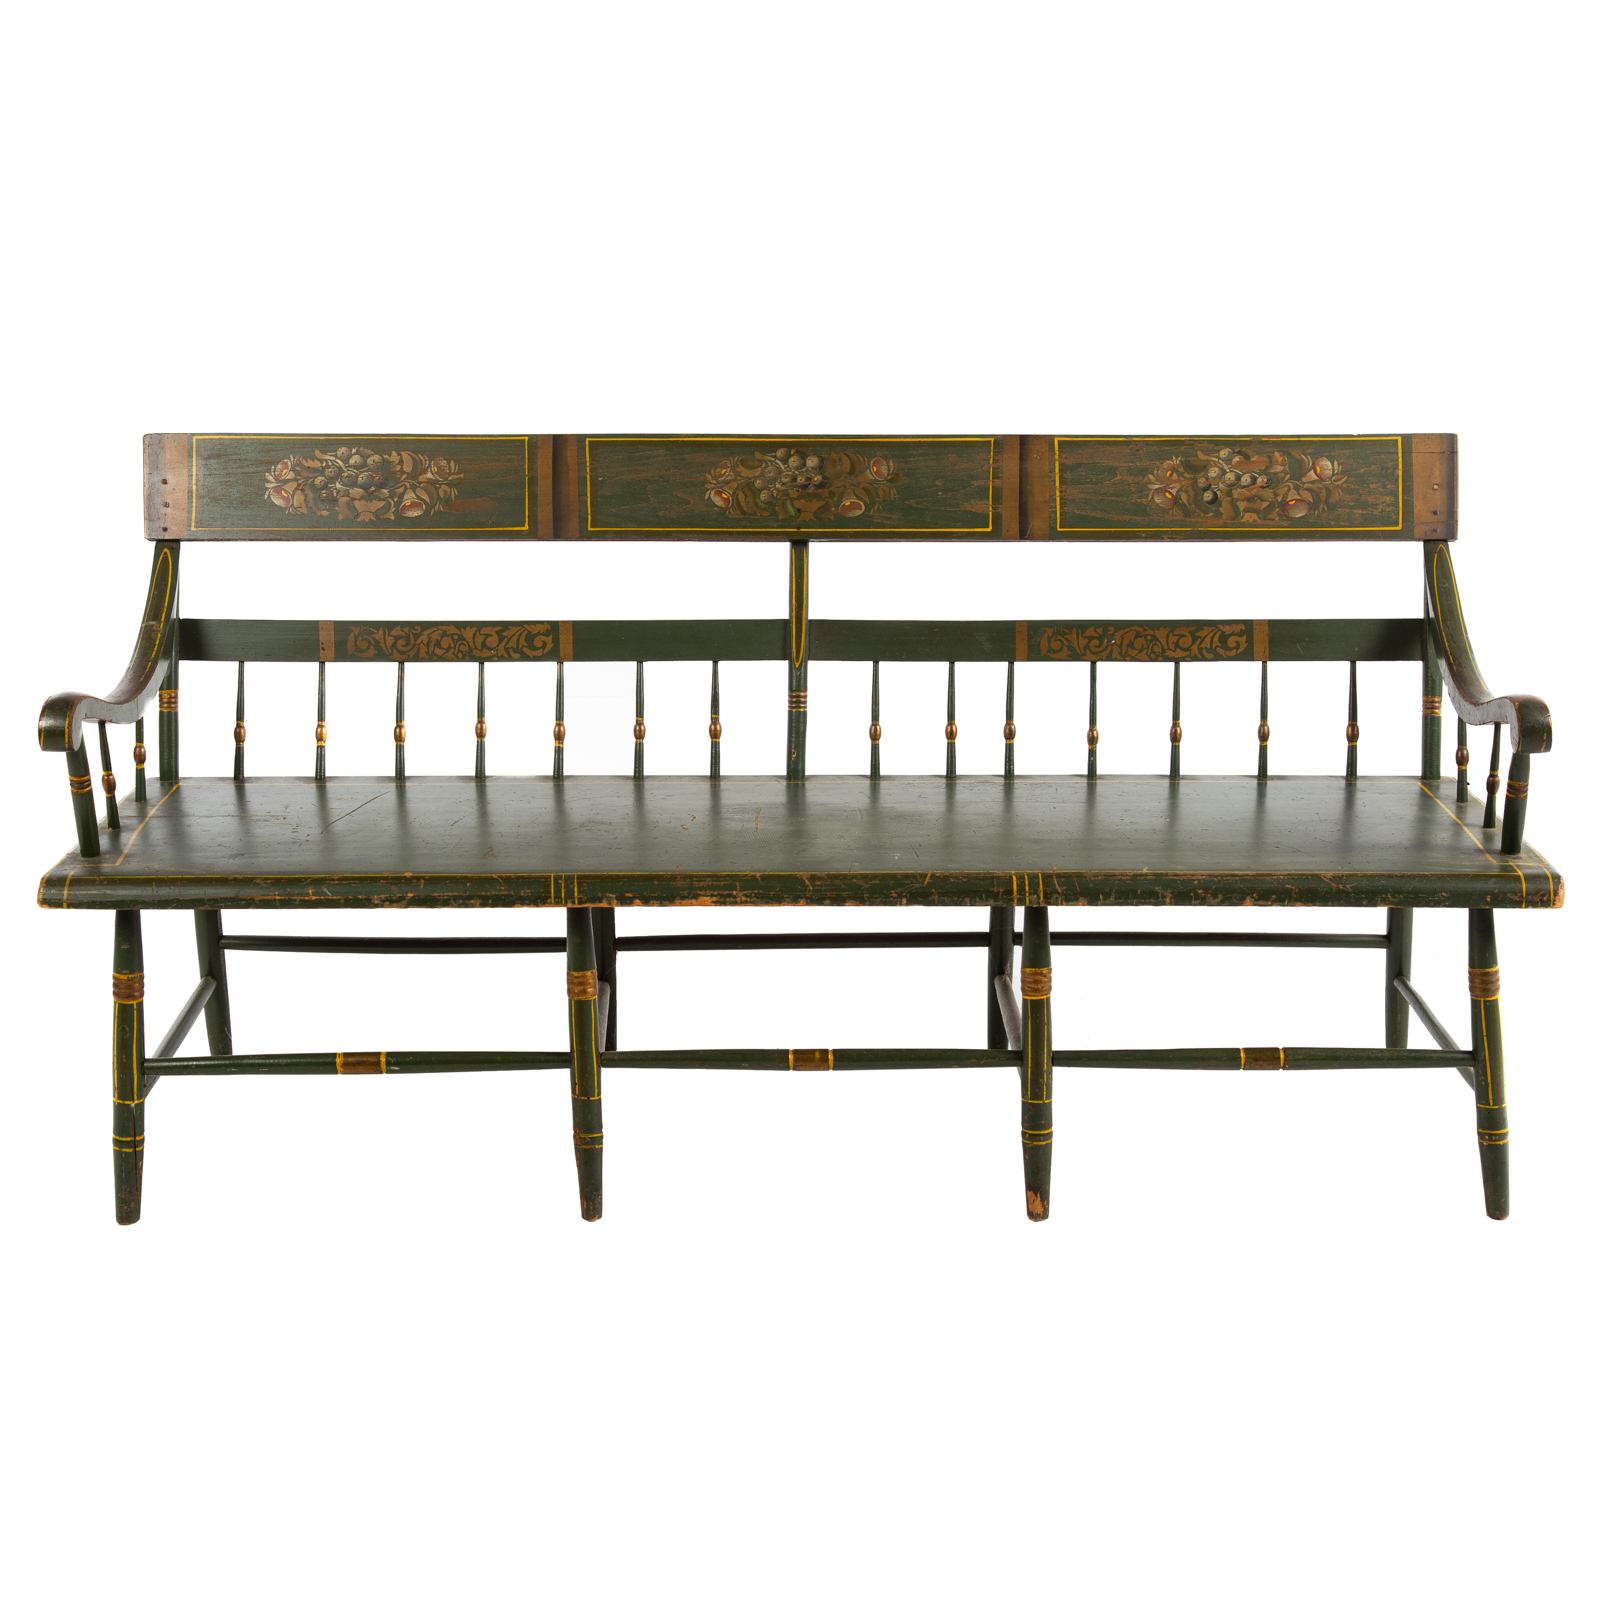 AMERICAN PAINTED WOOD WINDSOR BENCH 3cae30